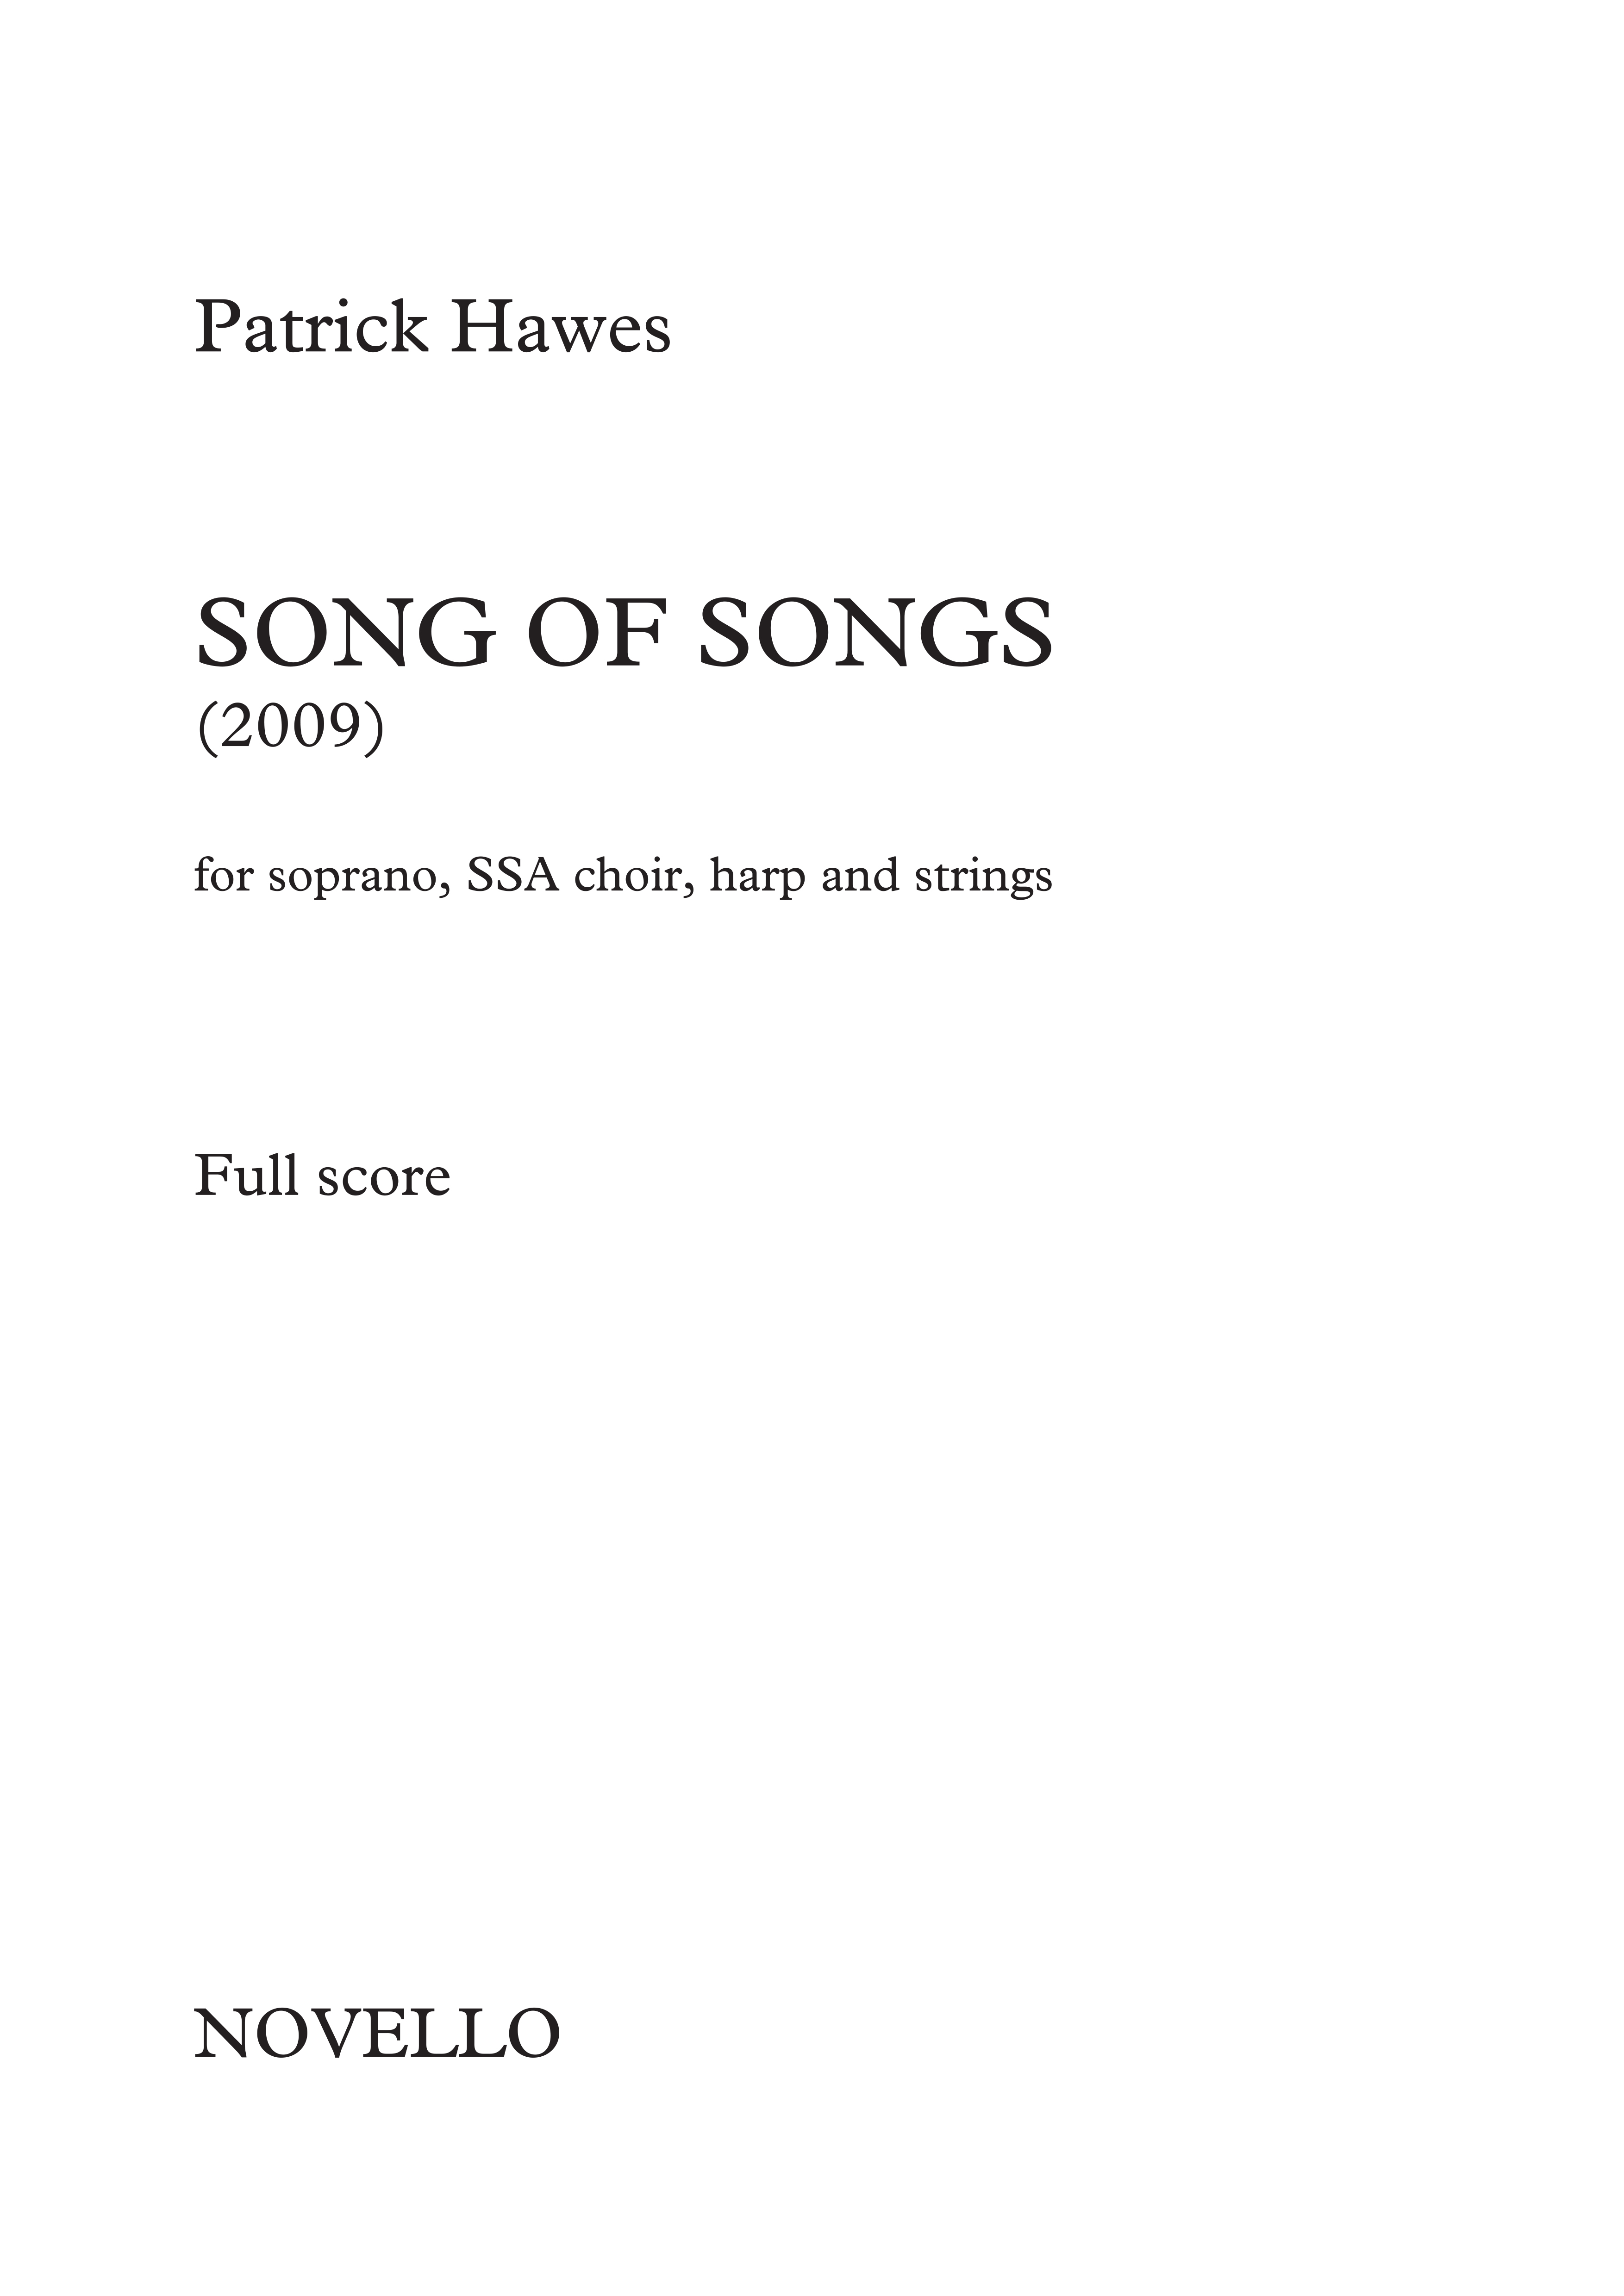 Patrick Hawes: Song of Songs (Full Score): SSA: Score and Parts